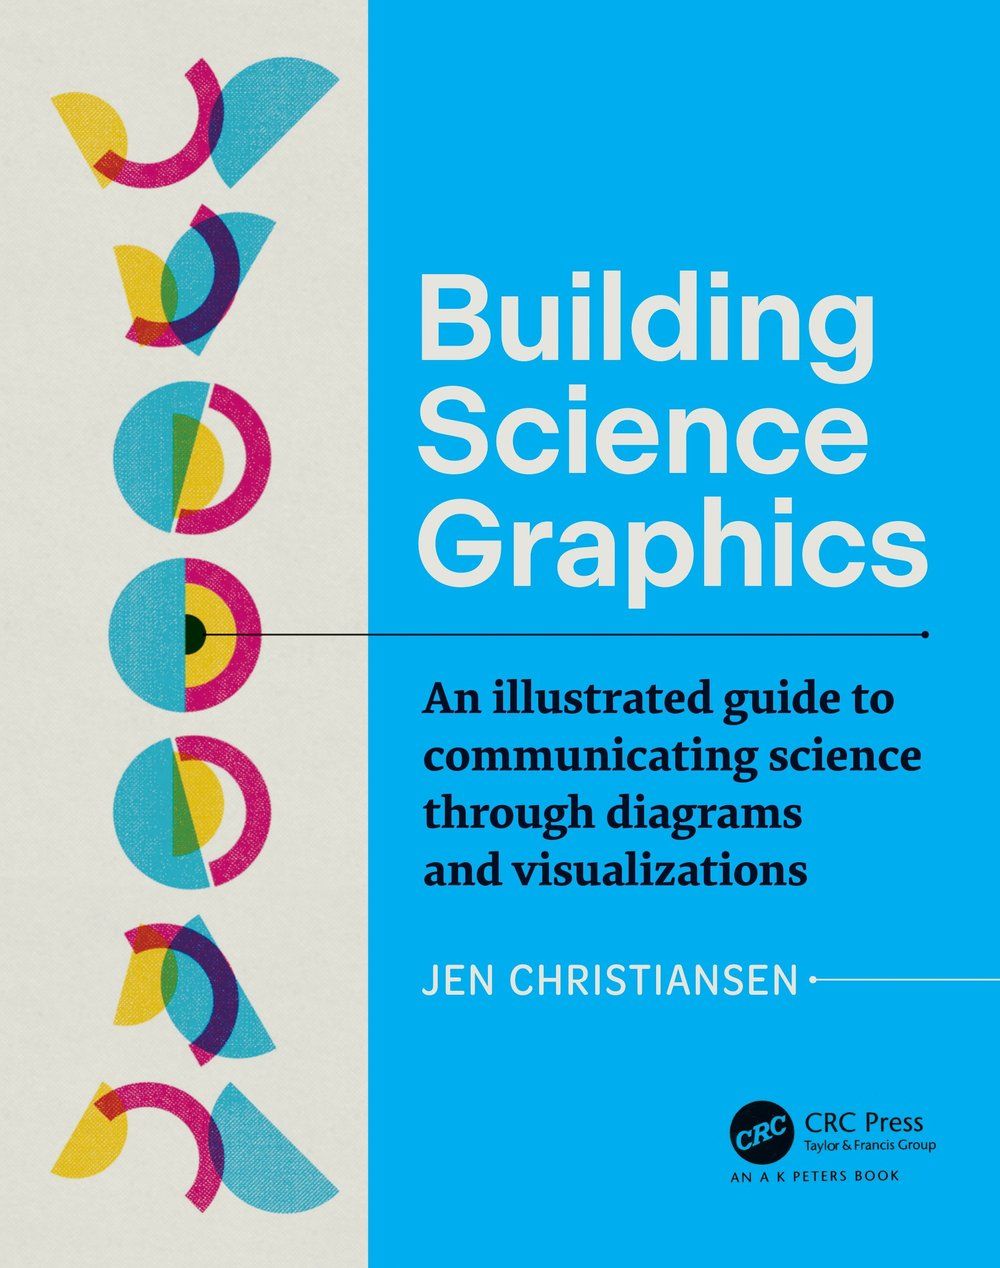 Building Science Graphics - Book Cover